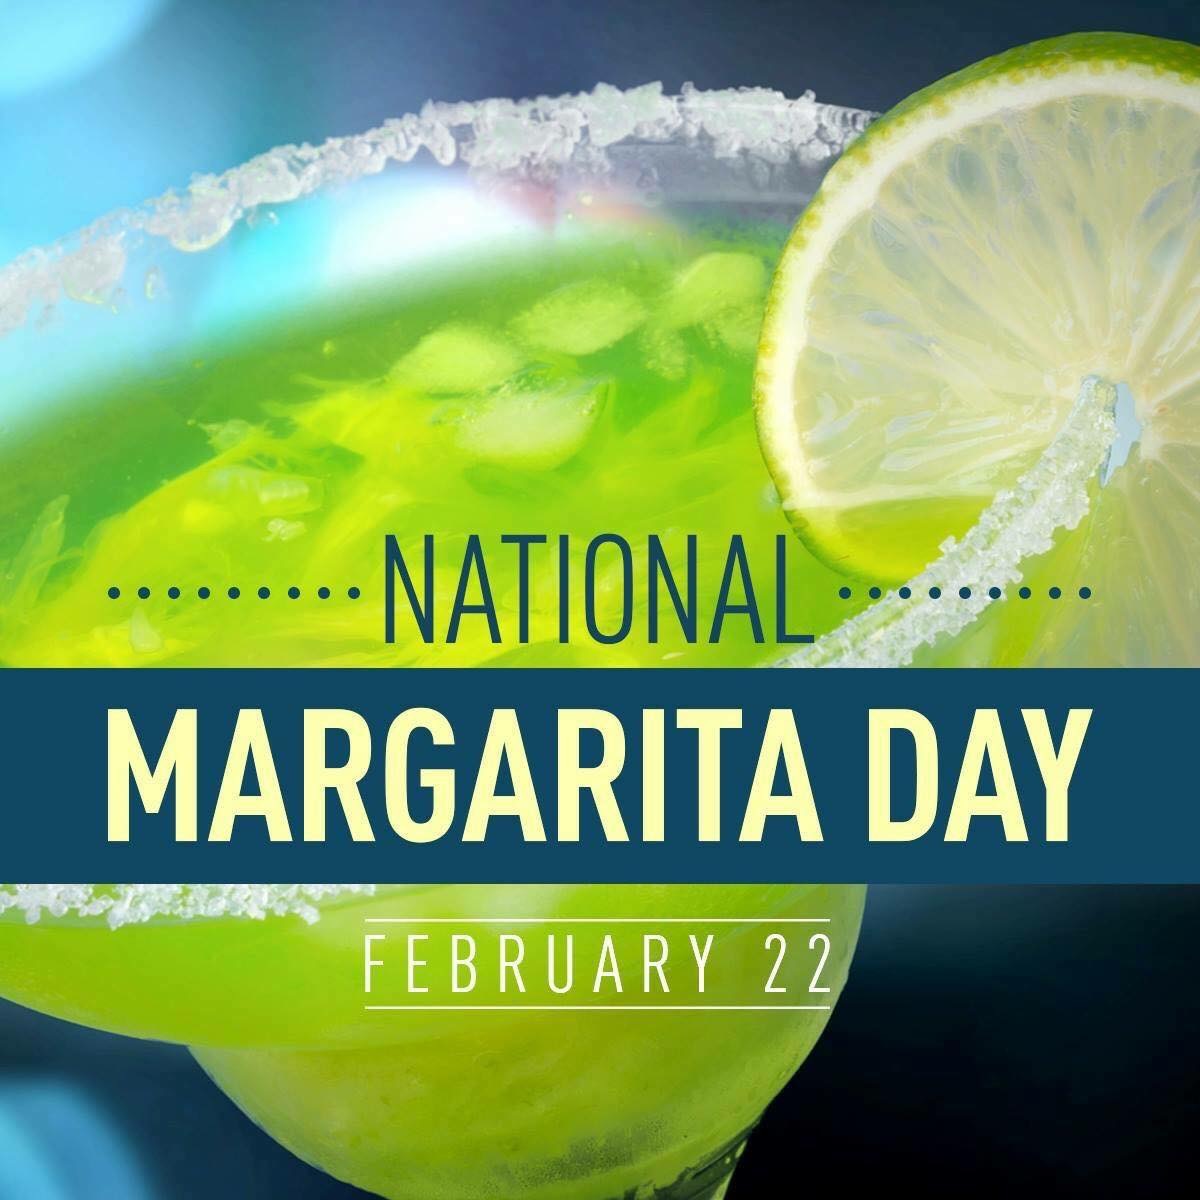 National Margarita Day in The Woodlands